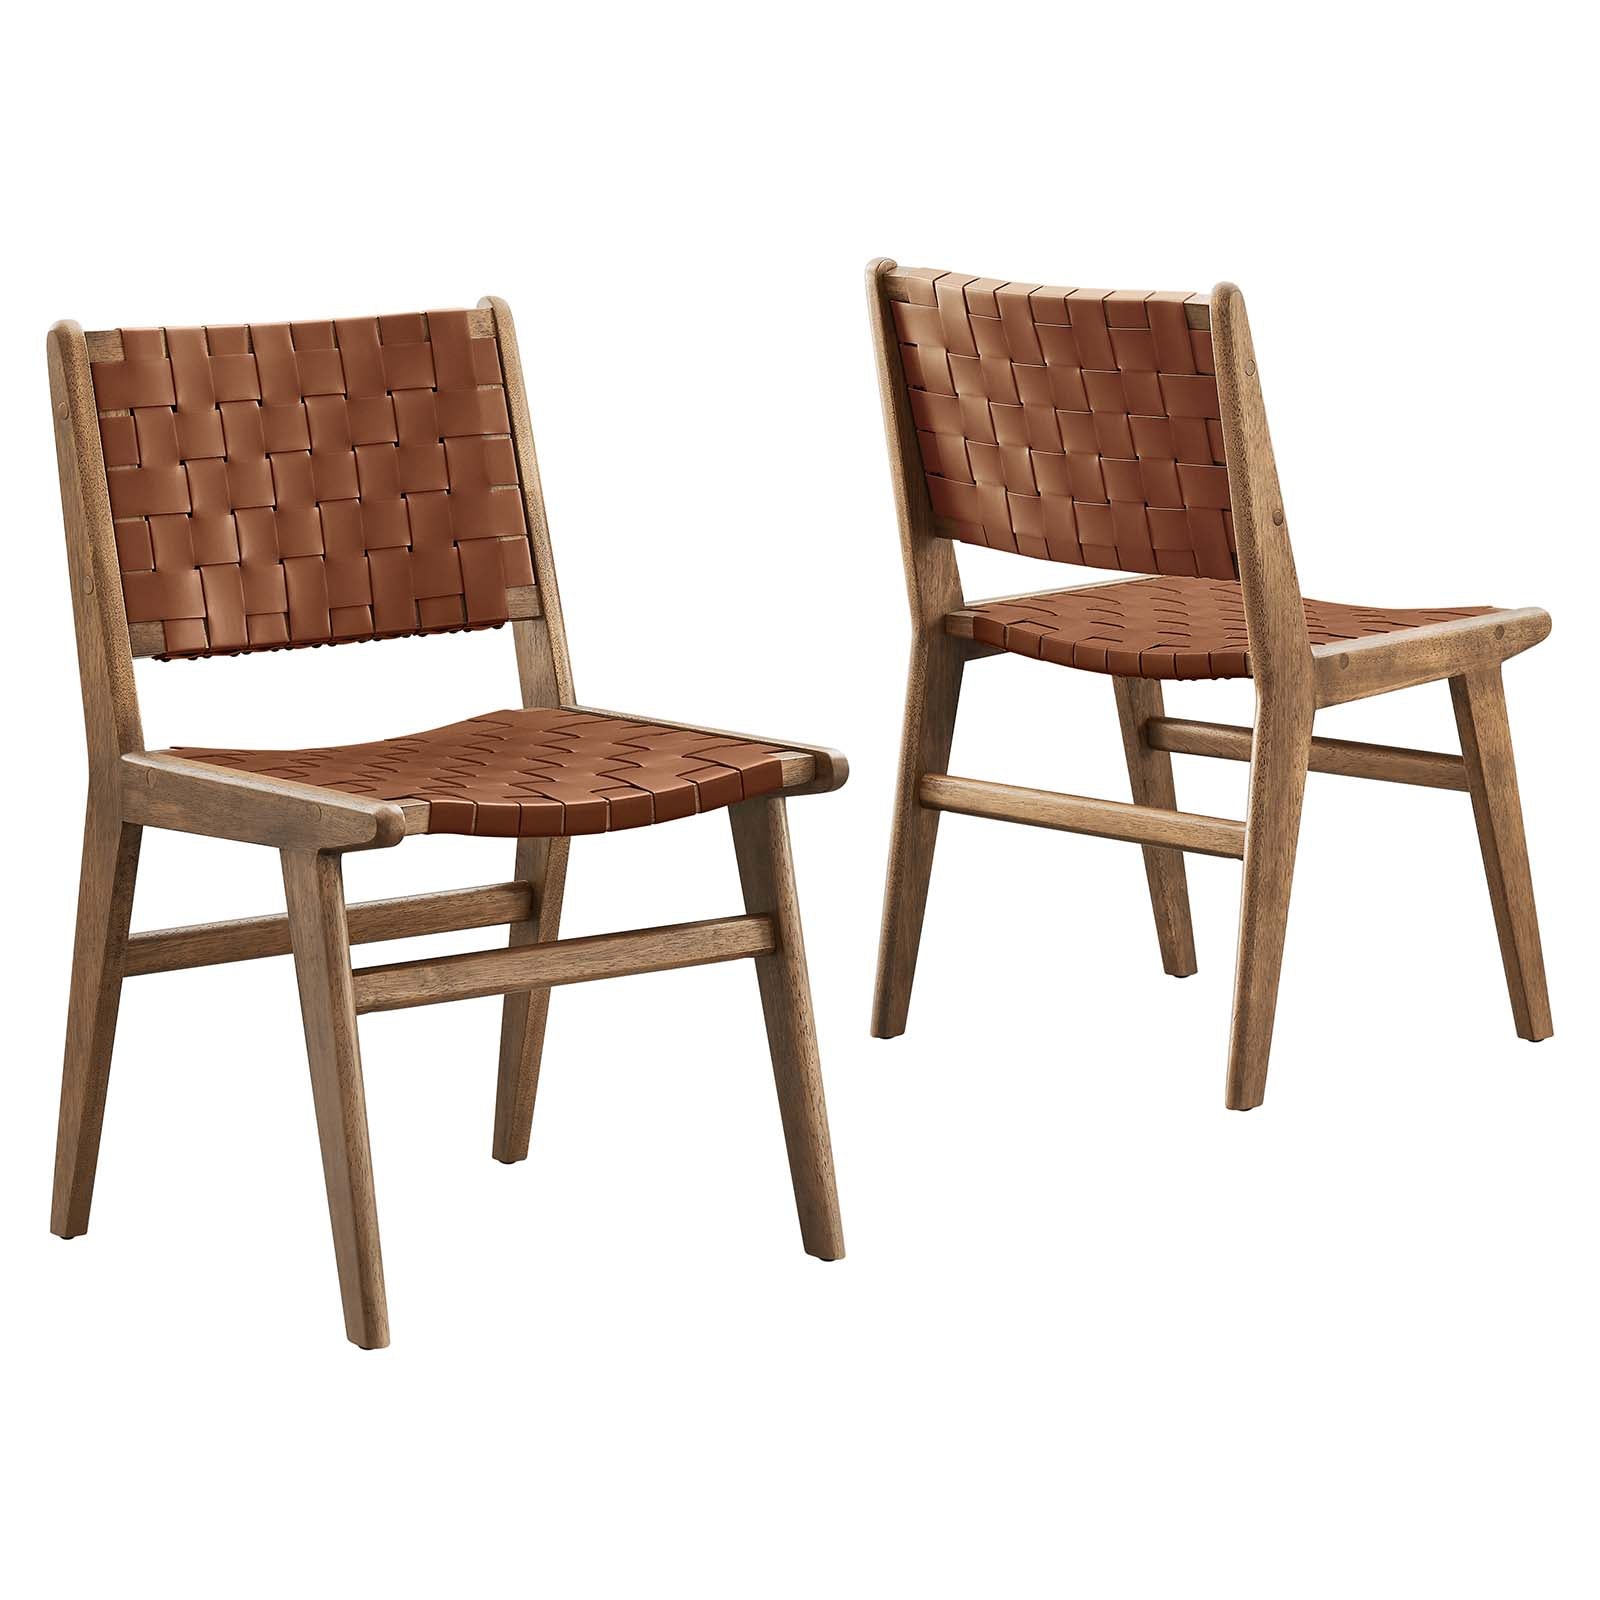 Saorise Woven Leather Wood Dining Side Chair - Set of 2